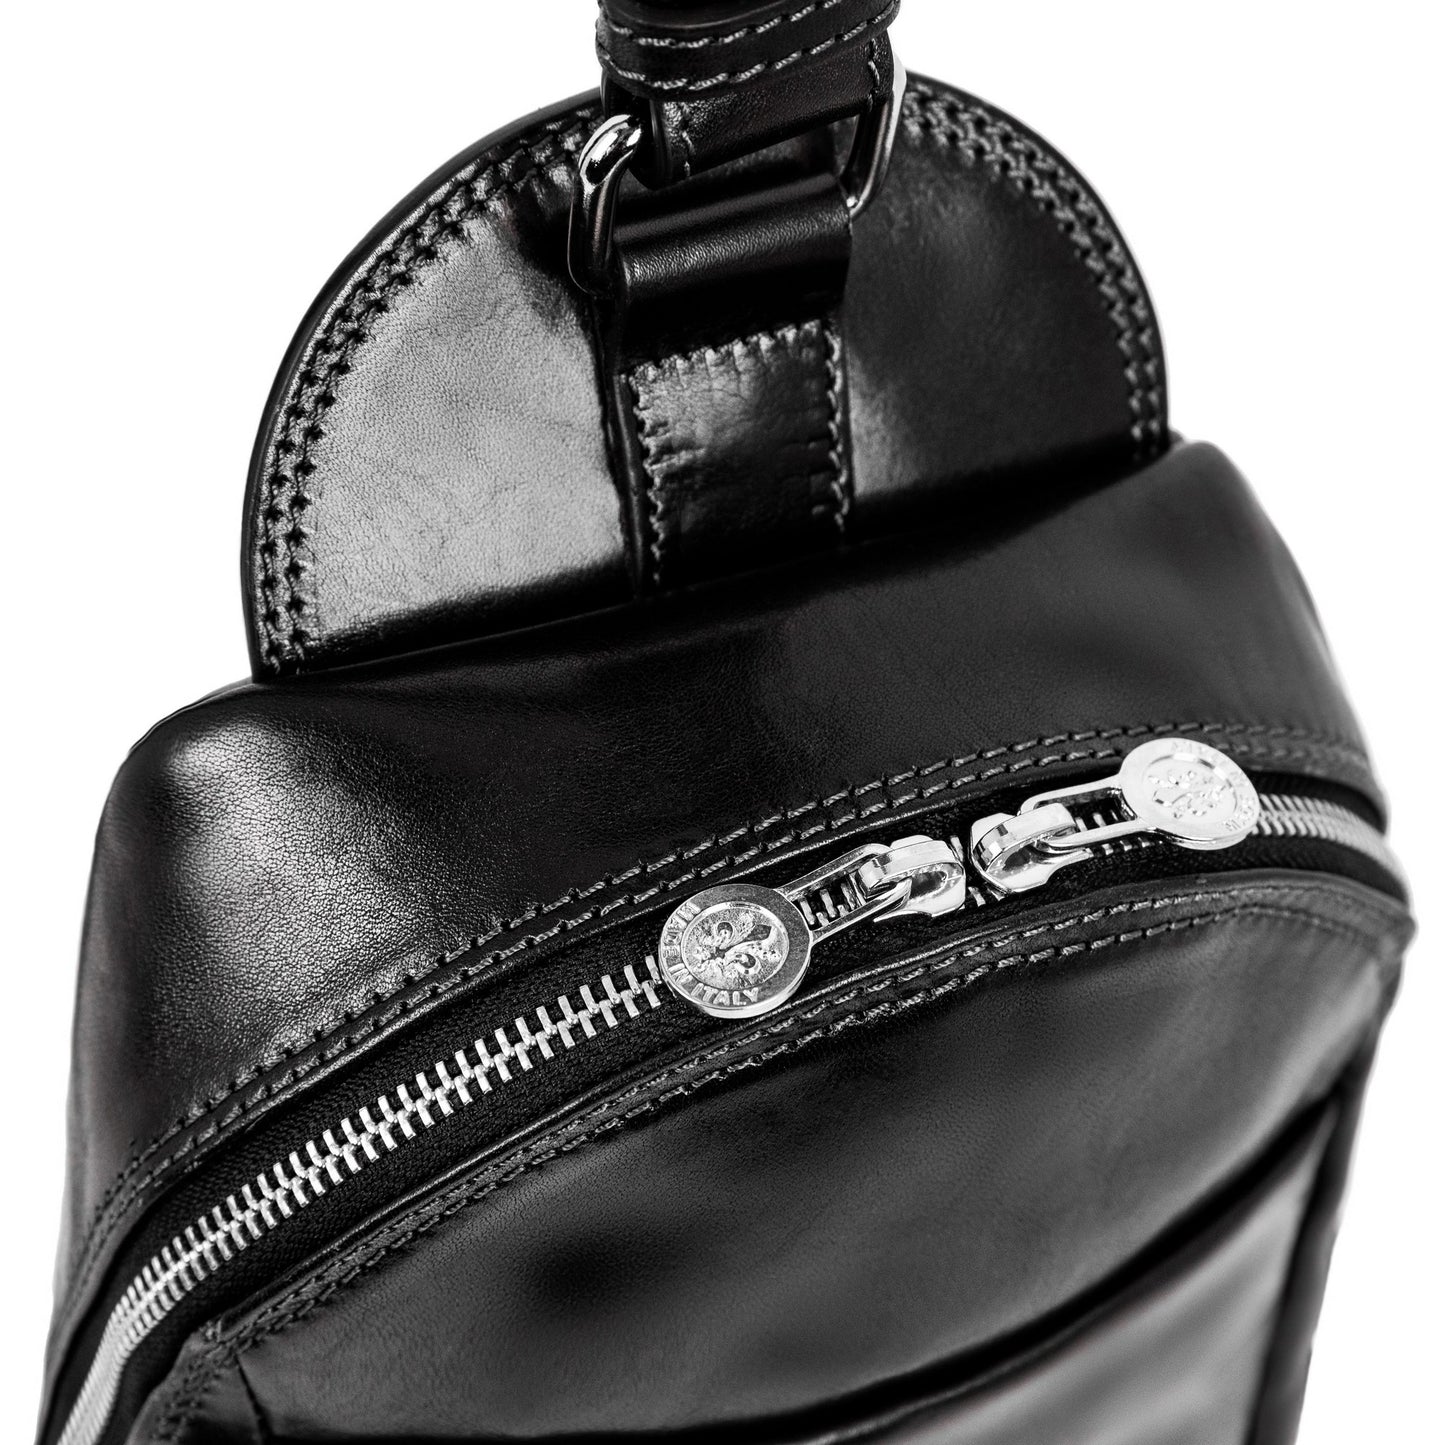 Leather Chest Bag Sling Bag - Murphy